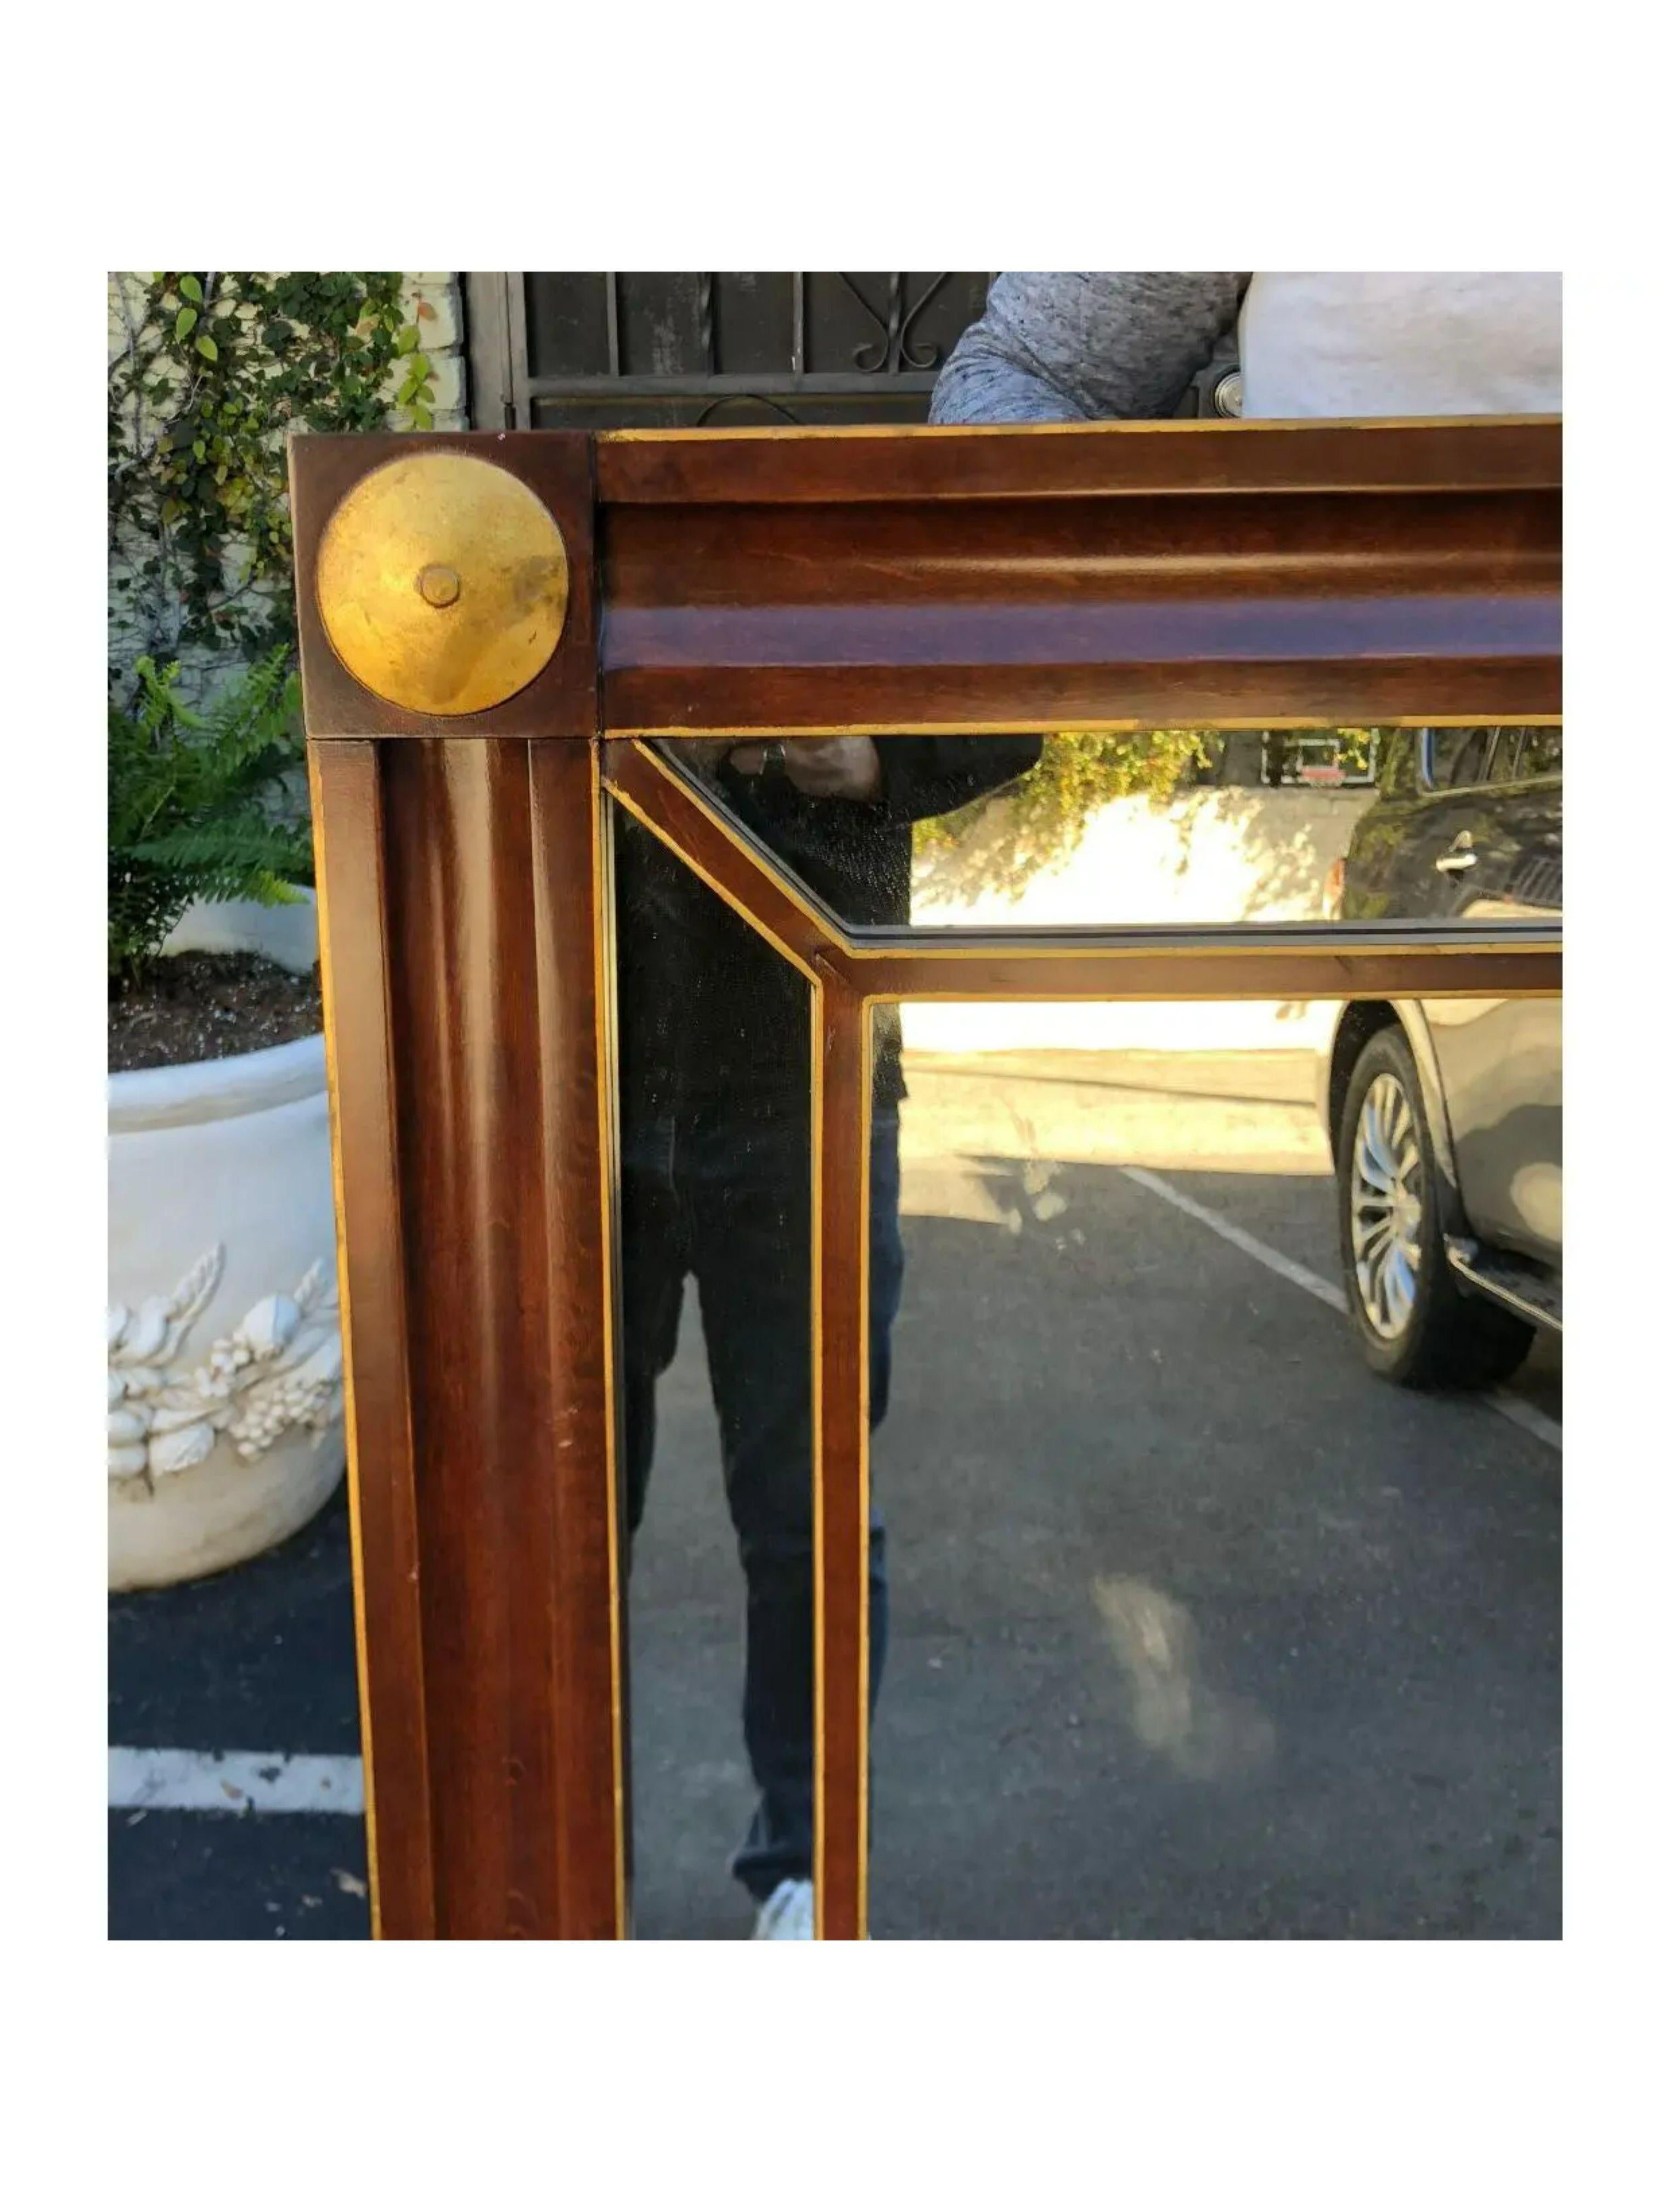 Empire mahogany & gilt-wood mirror by Baker Furniture Company

Additional information: 
Materials: mahogany, mirror
Please note that this item contains materials that are legally subject to a special export process that may extend the delivery